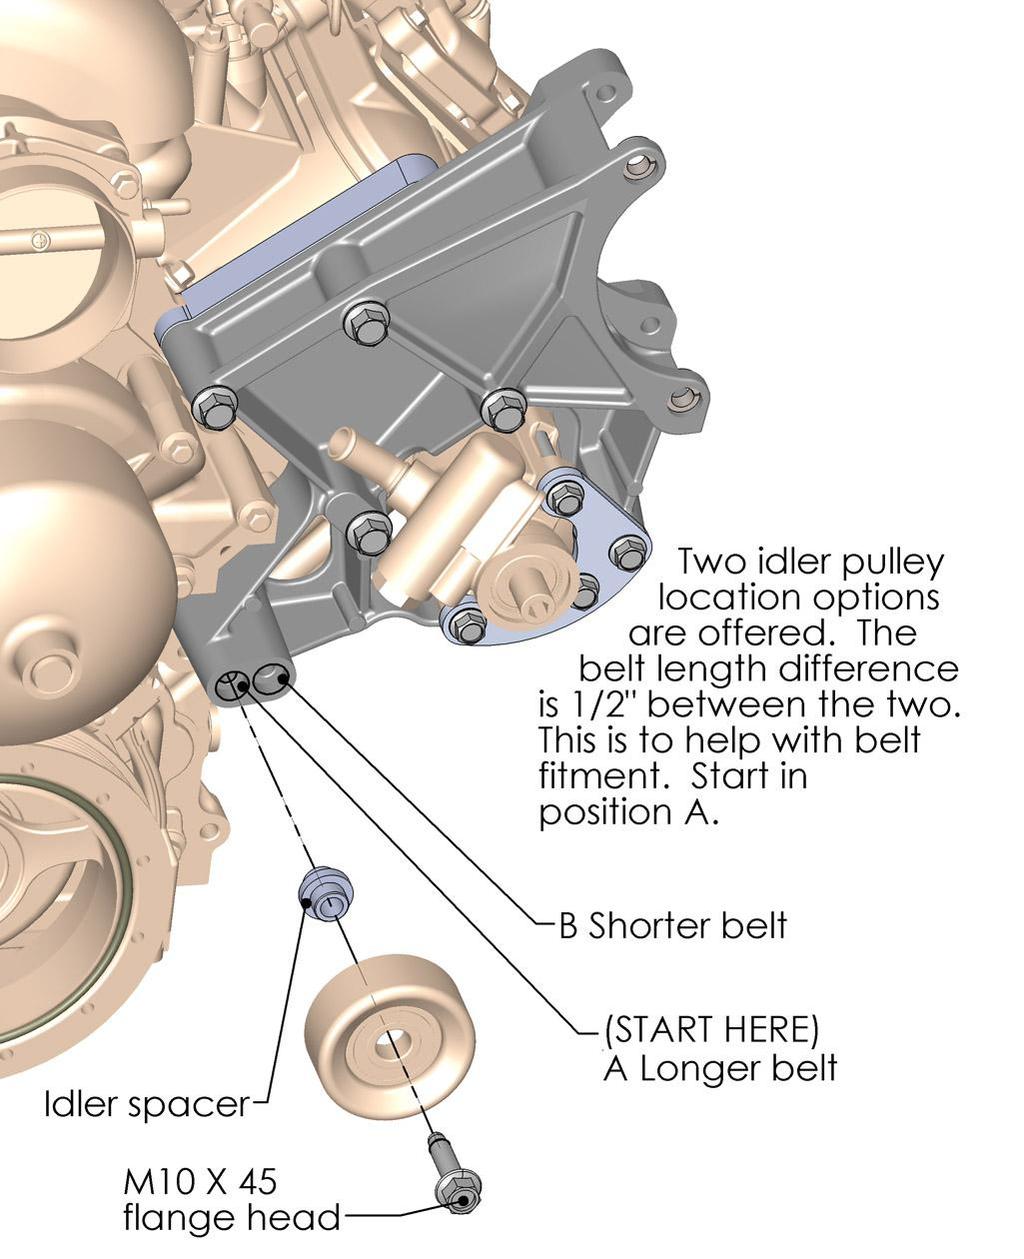 Idler Pulley Installation (position options): NOTE: